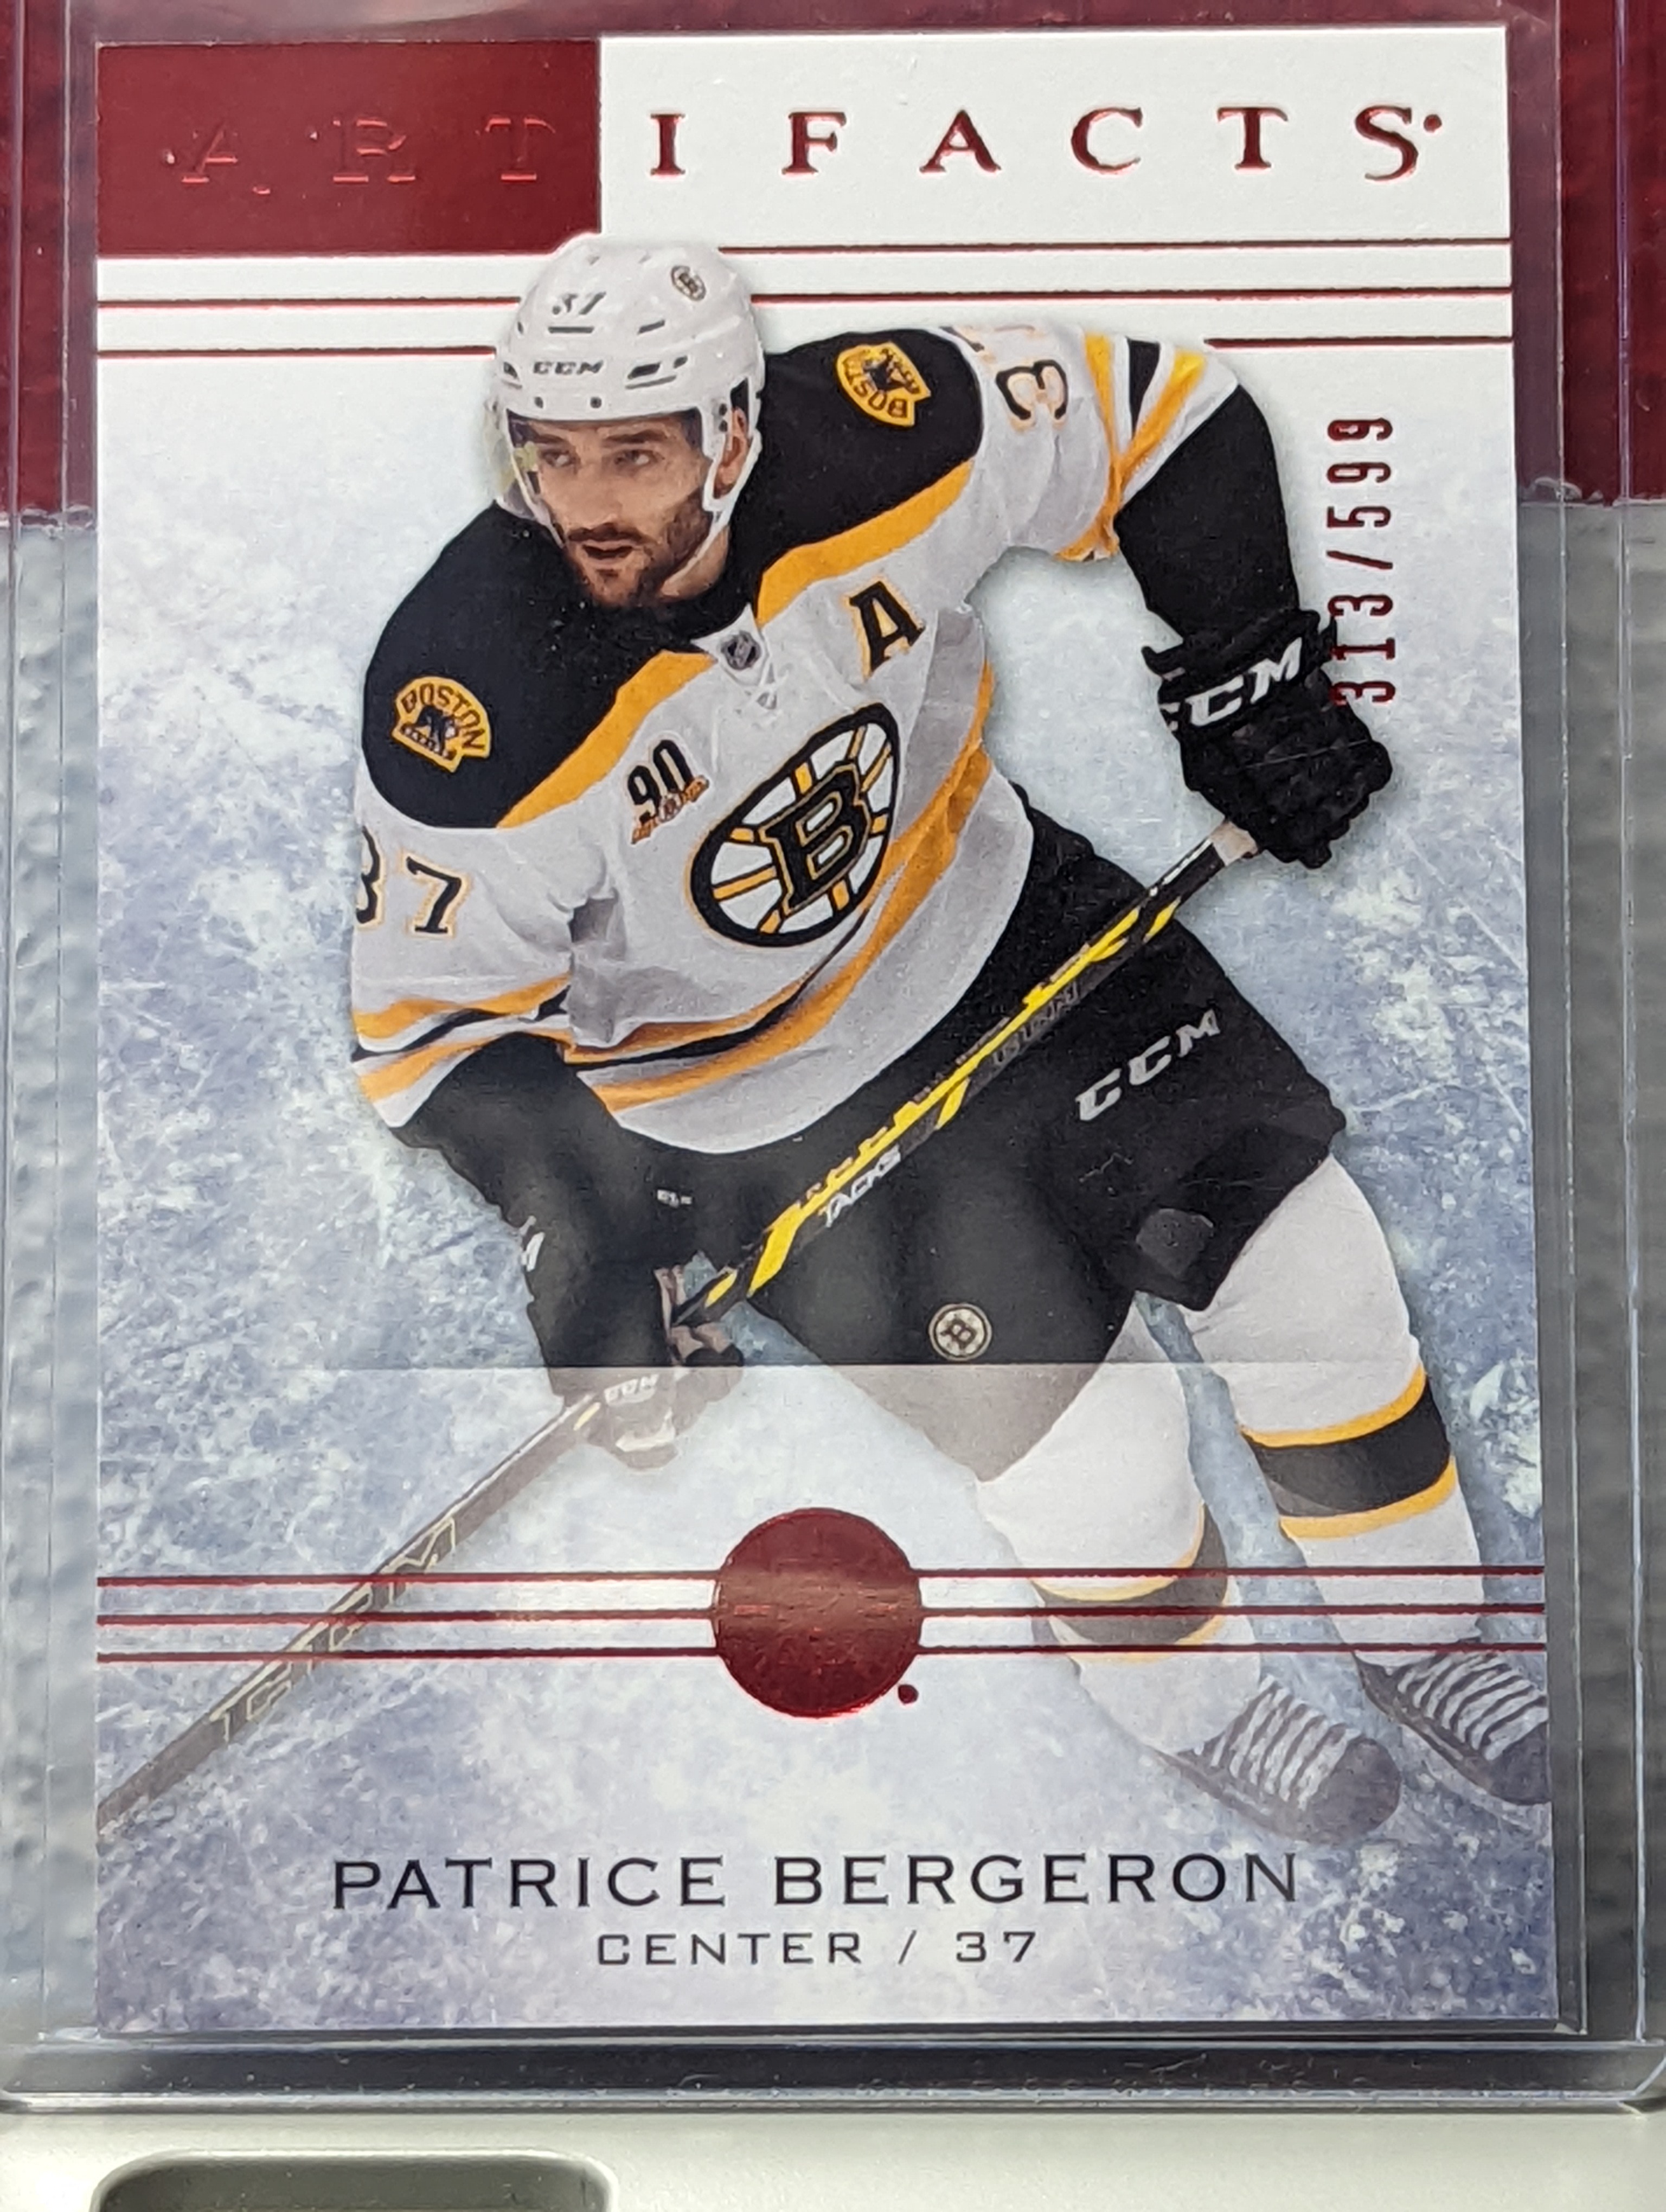 Secure Trade Club - Patrice Bergeron Artifacts UD # card